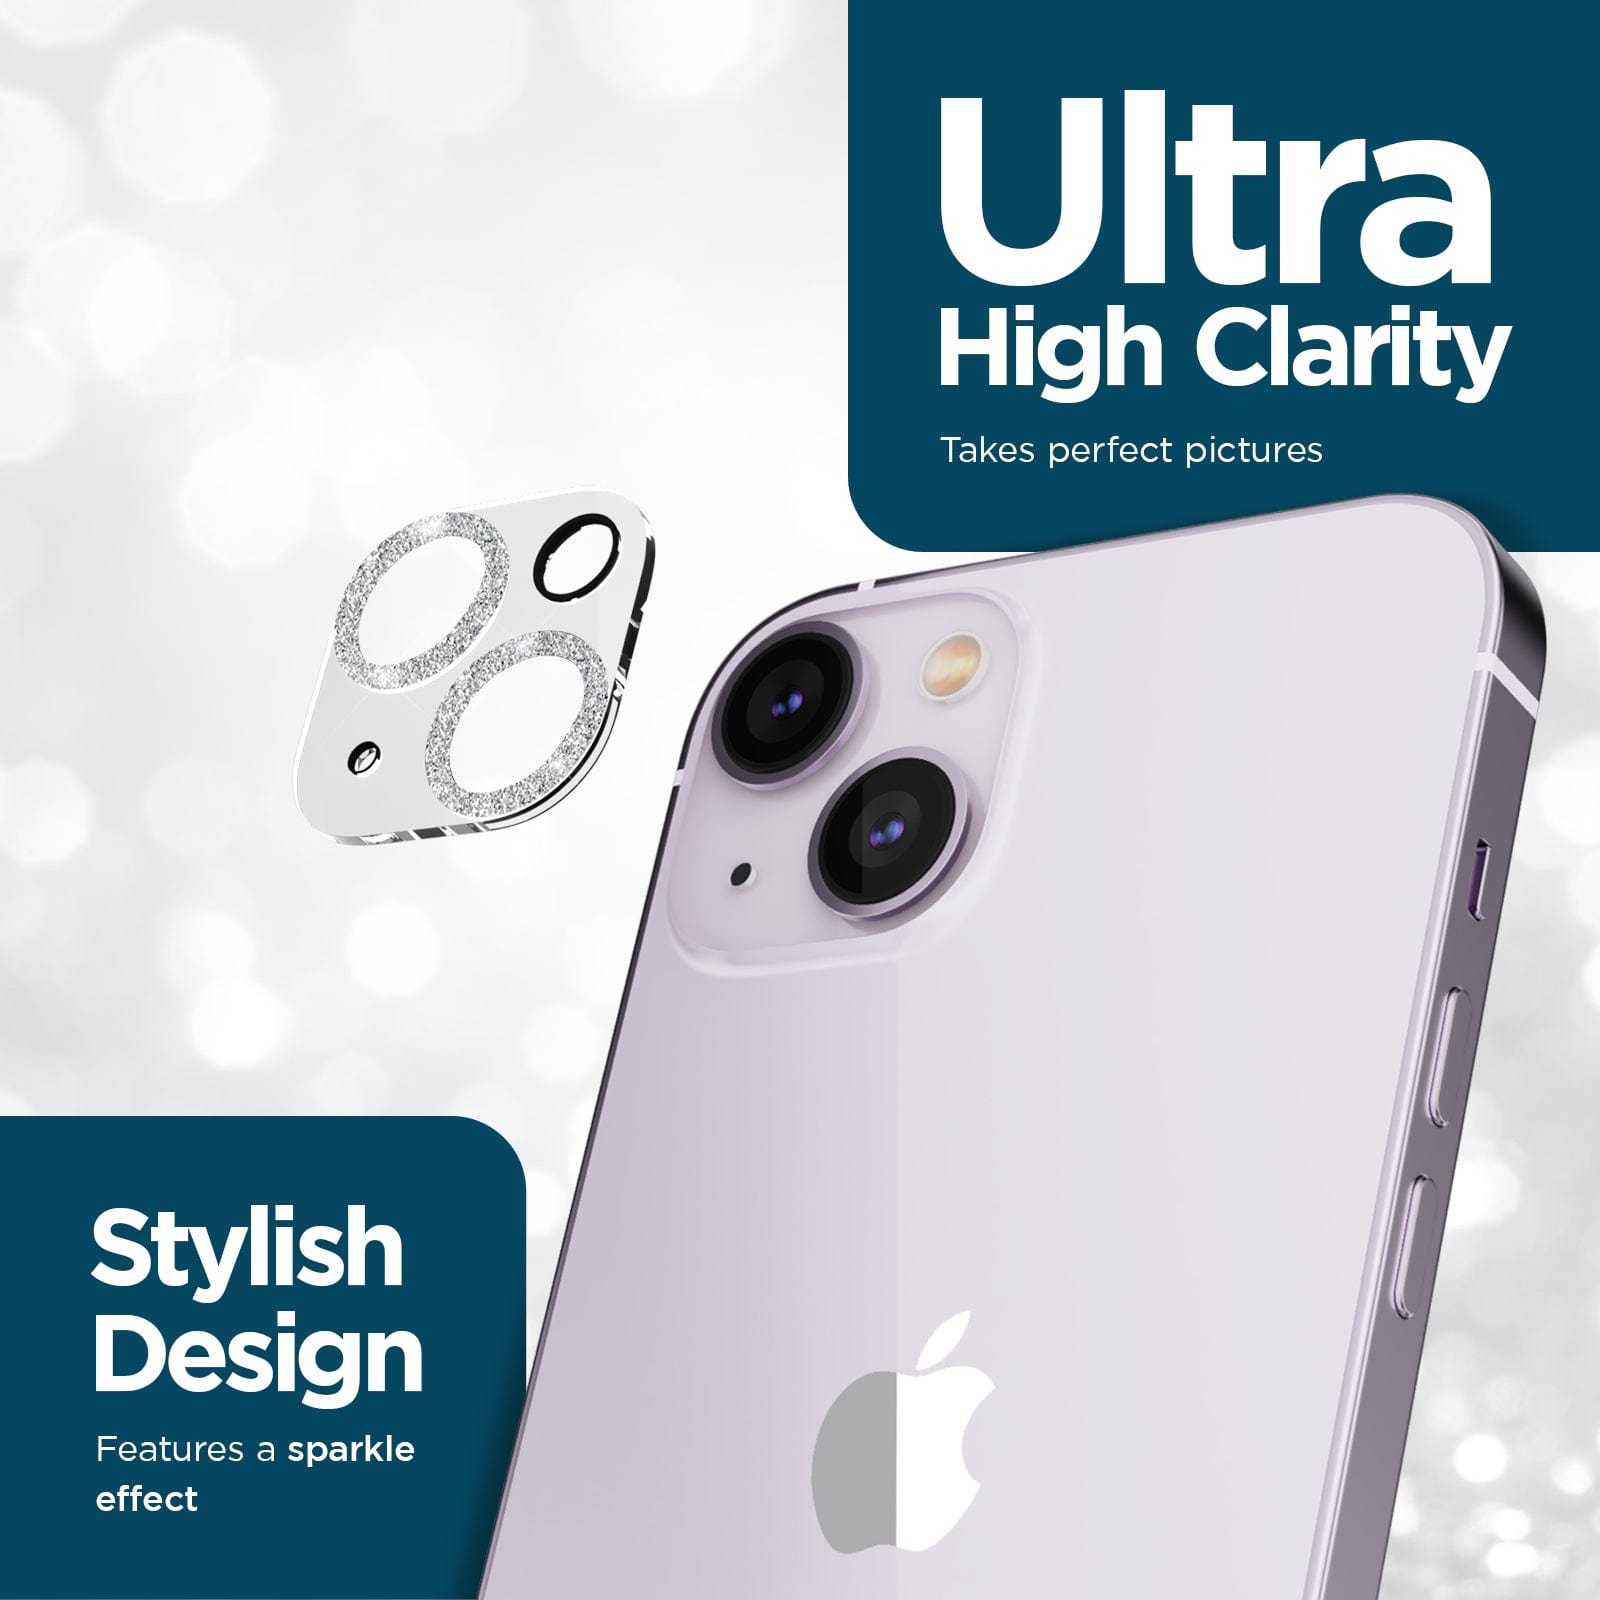 ULTRA HIGH CLARITY - TAKES PERFECT PICTURES. STYLISH DEISN FEATURES A SPARKLE EFFECT